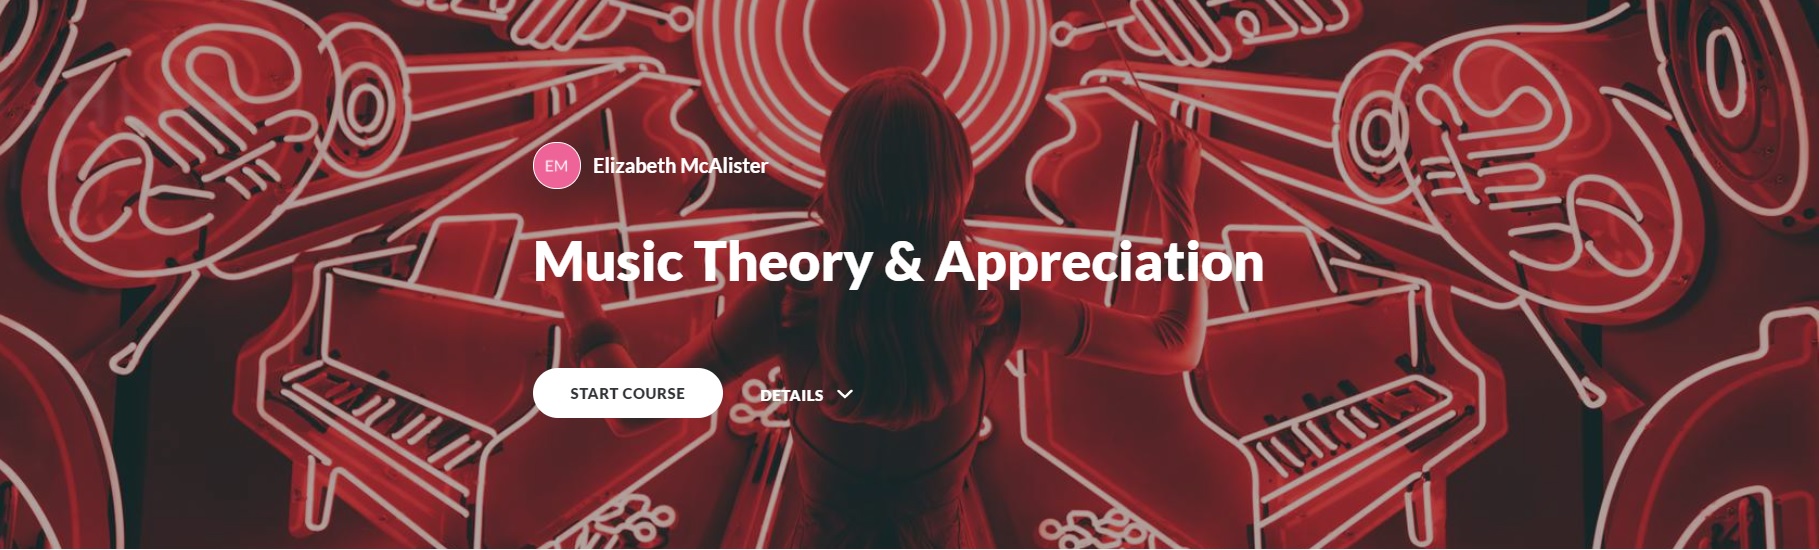 Link to Music Theory and Appreciation course built in Rise360